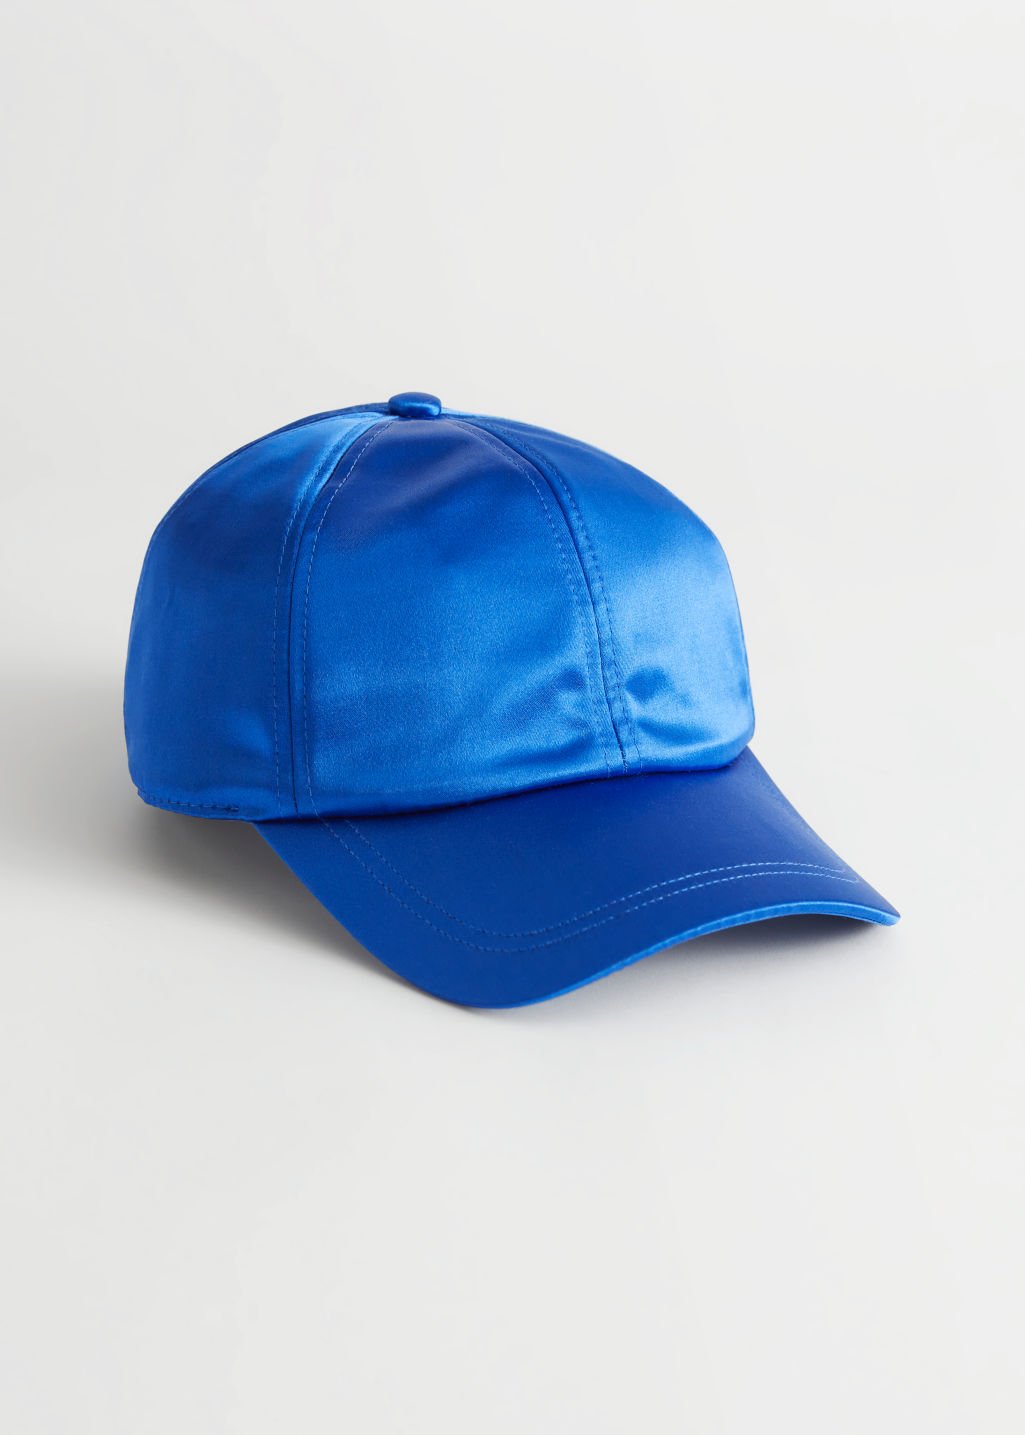 & OTHER STORIES Satin Baseball Cap in Blue | Endource